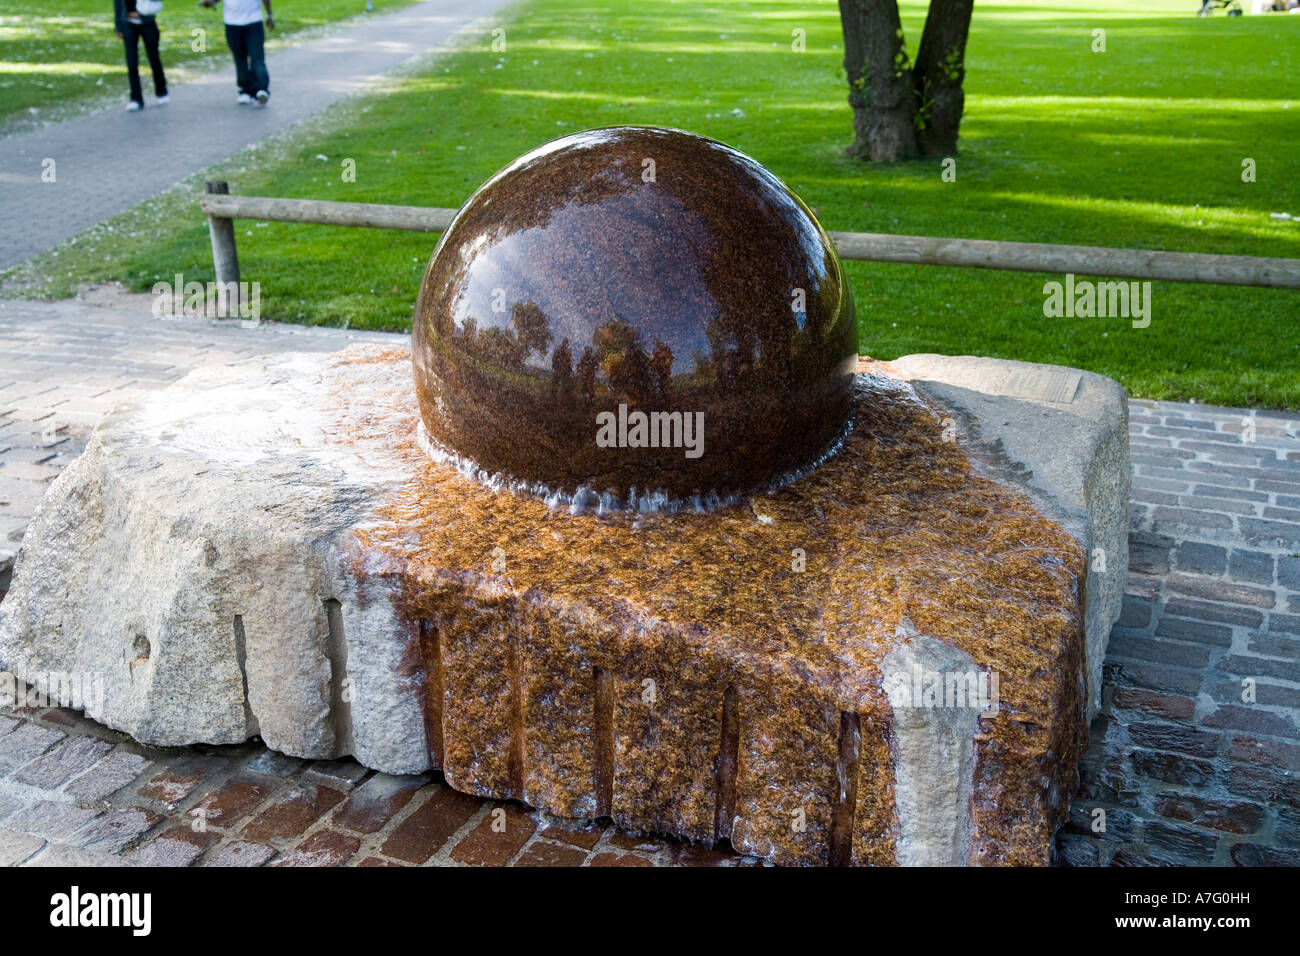 Phanomena Brunnen is a fountain in which a two foot diameter stone ball is suspended on a thin film of water allowing the ball t Stock Photo